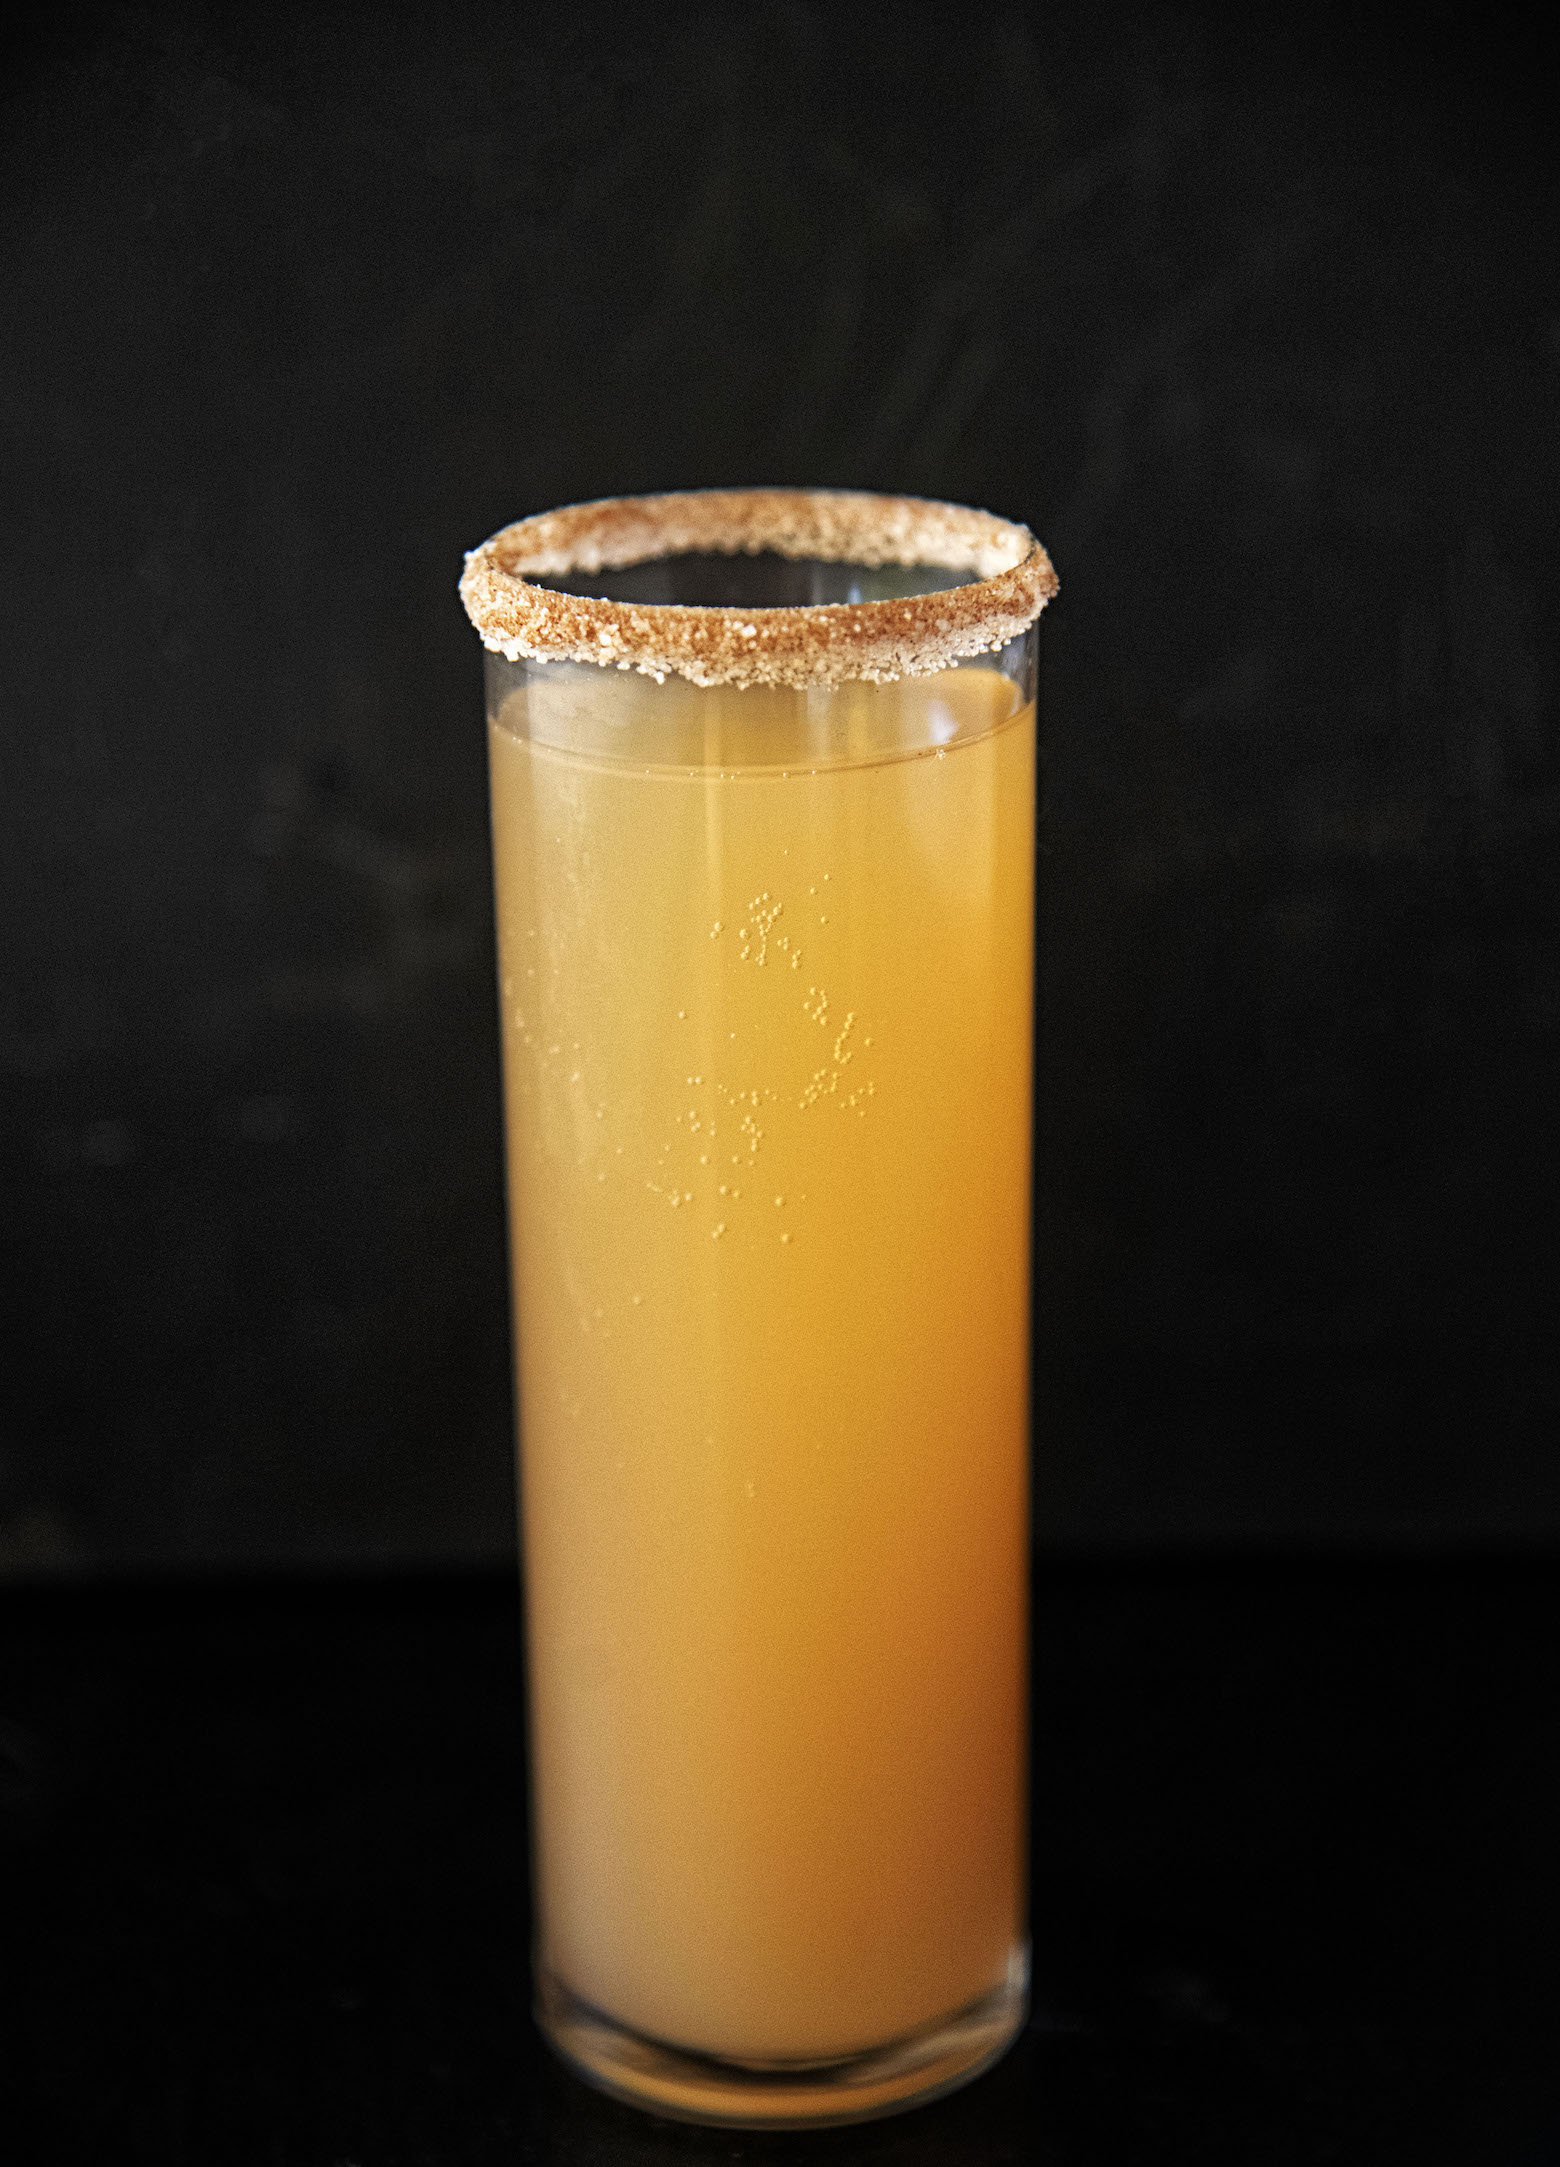 Snickerdoodle Apple Cider Mimosa